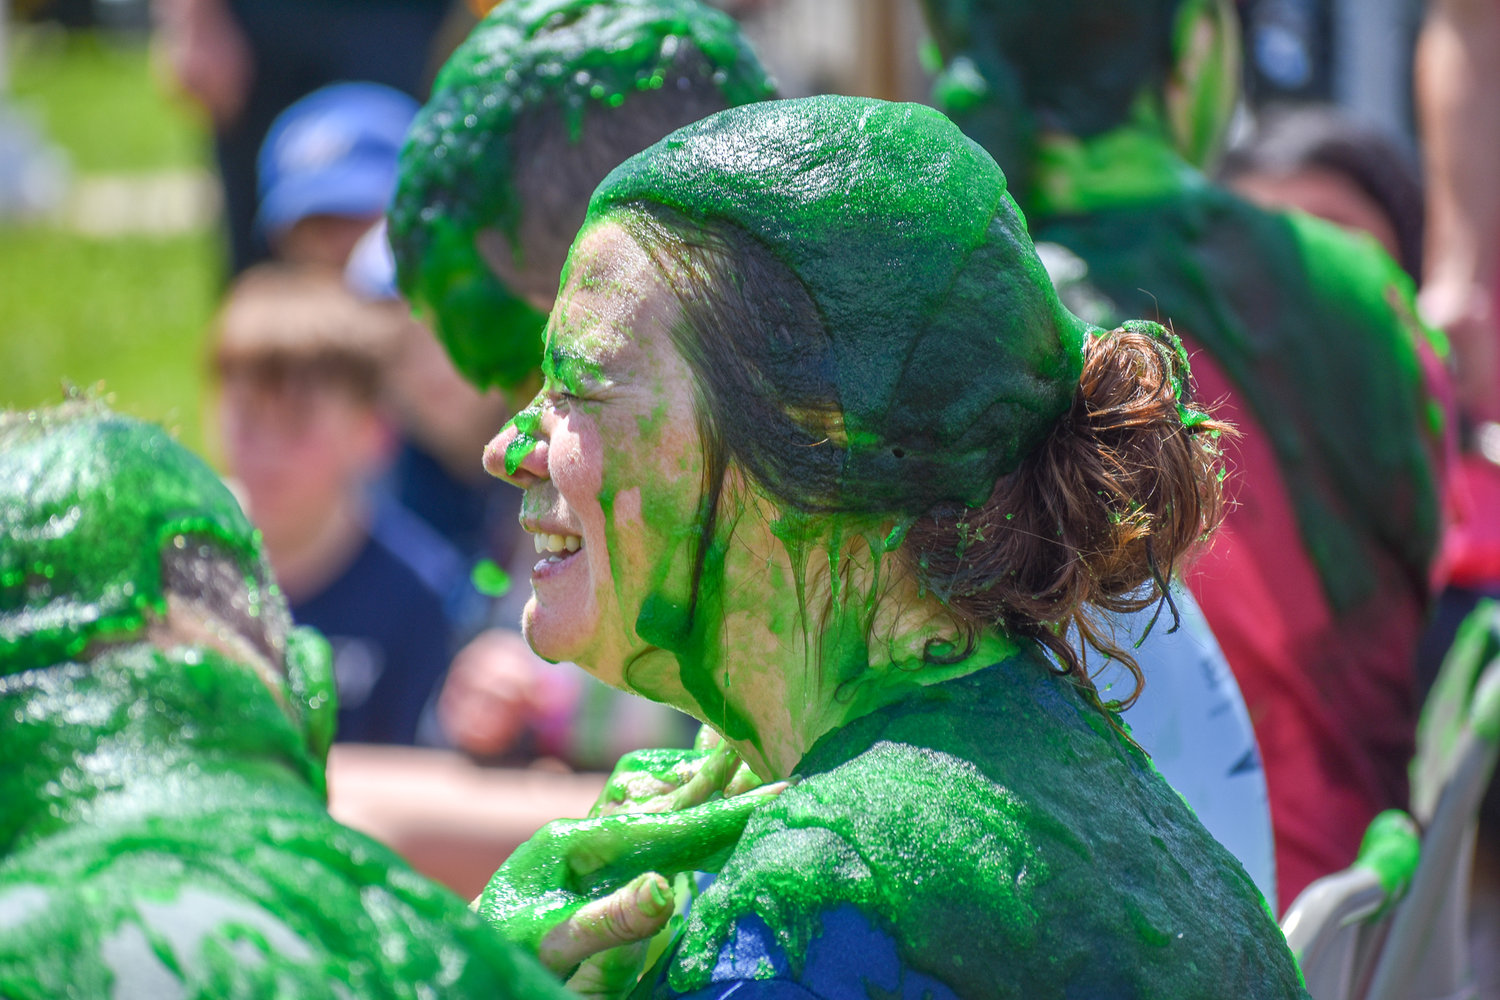 The slime and its jelly-like texture come from mixing a special powder with water. Elementary Principal LeeAnn Cucci is seen covered in the substance.